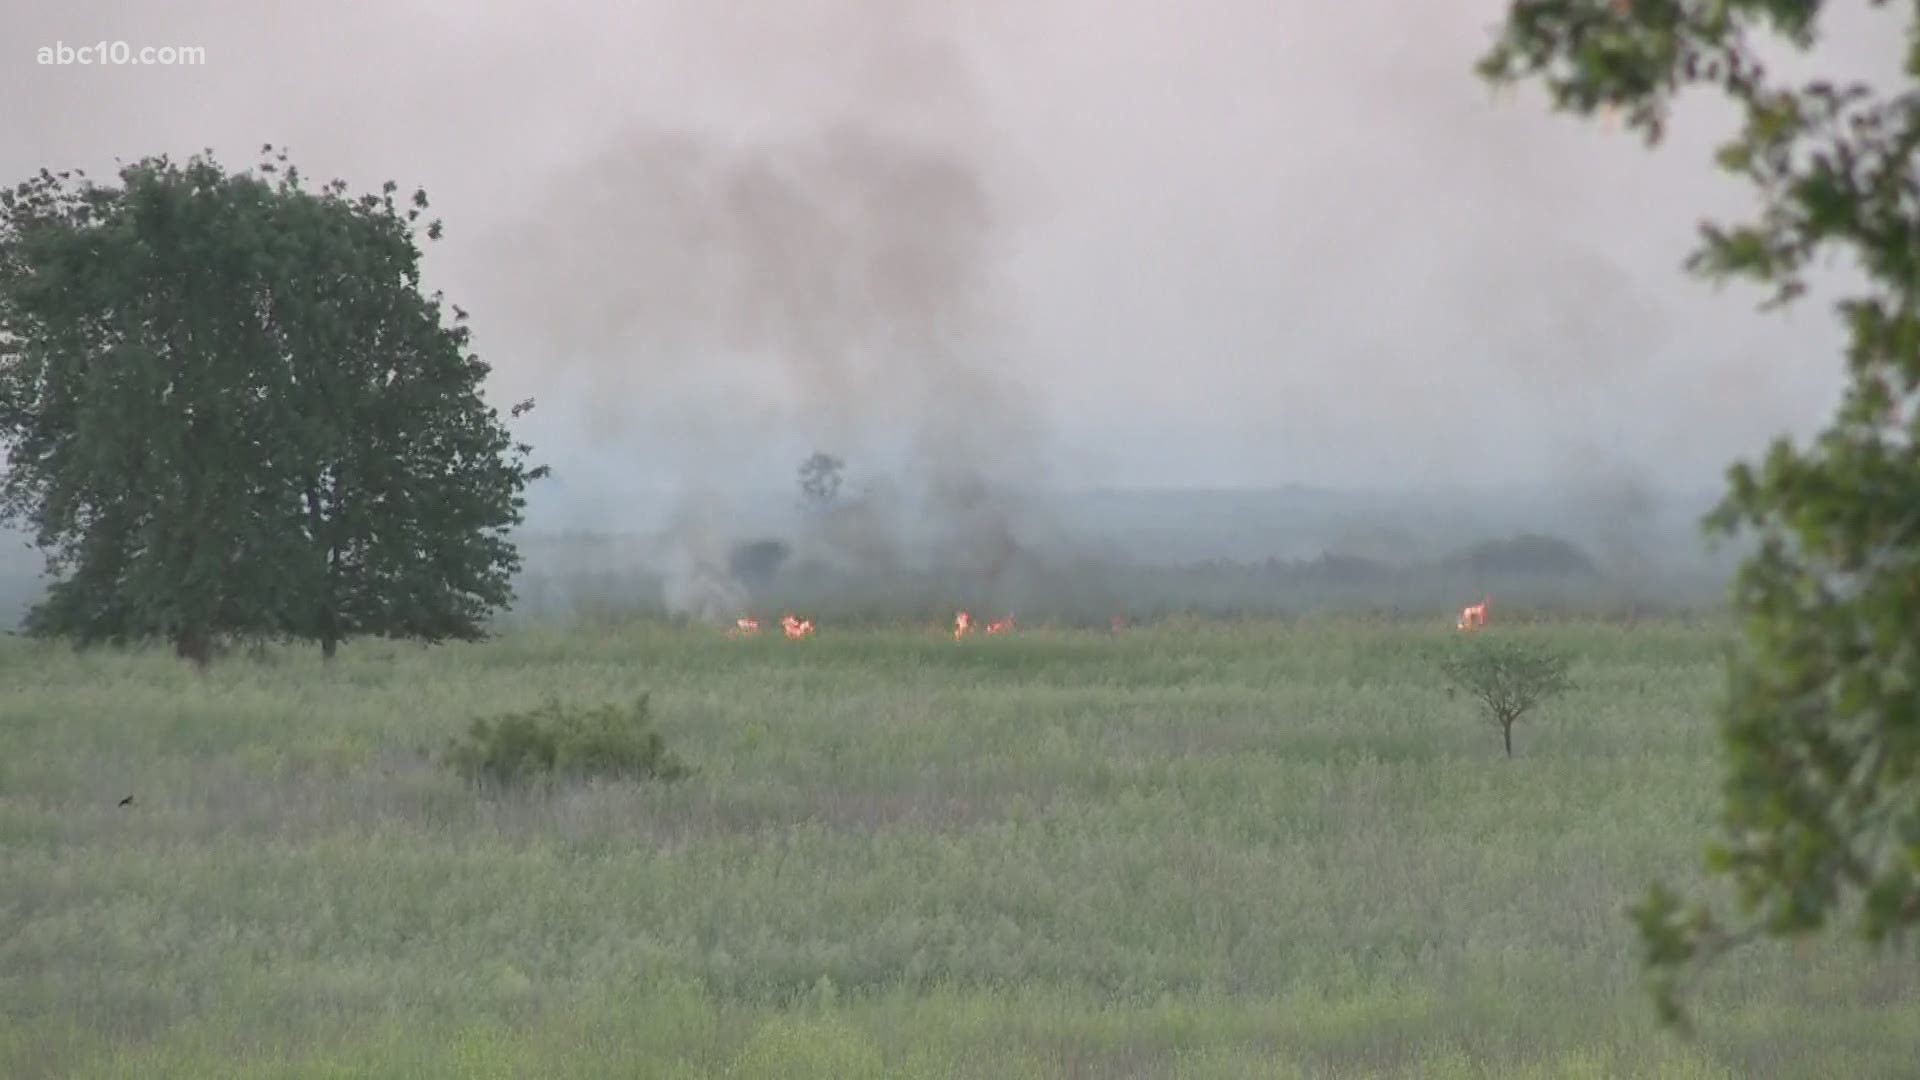 A 500 acre grass fire near Fremont Weir Wildlife Area in Yolo County started overnight.